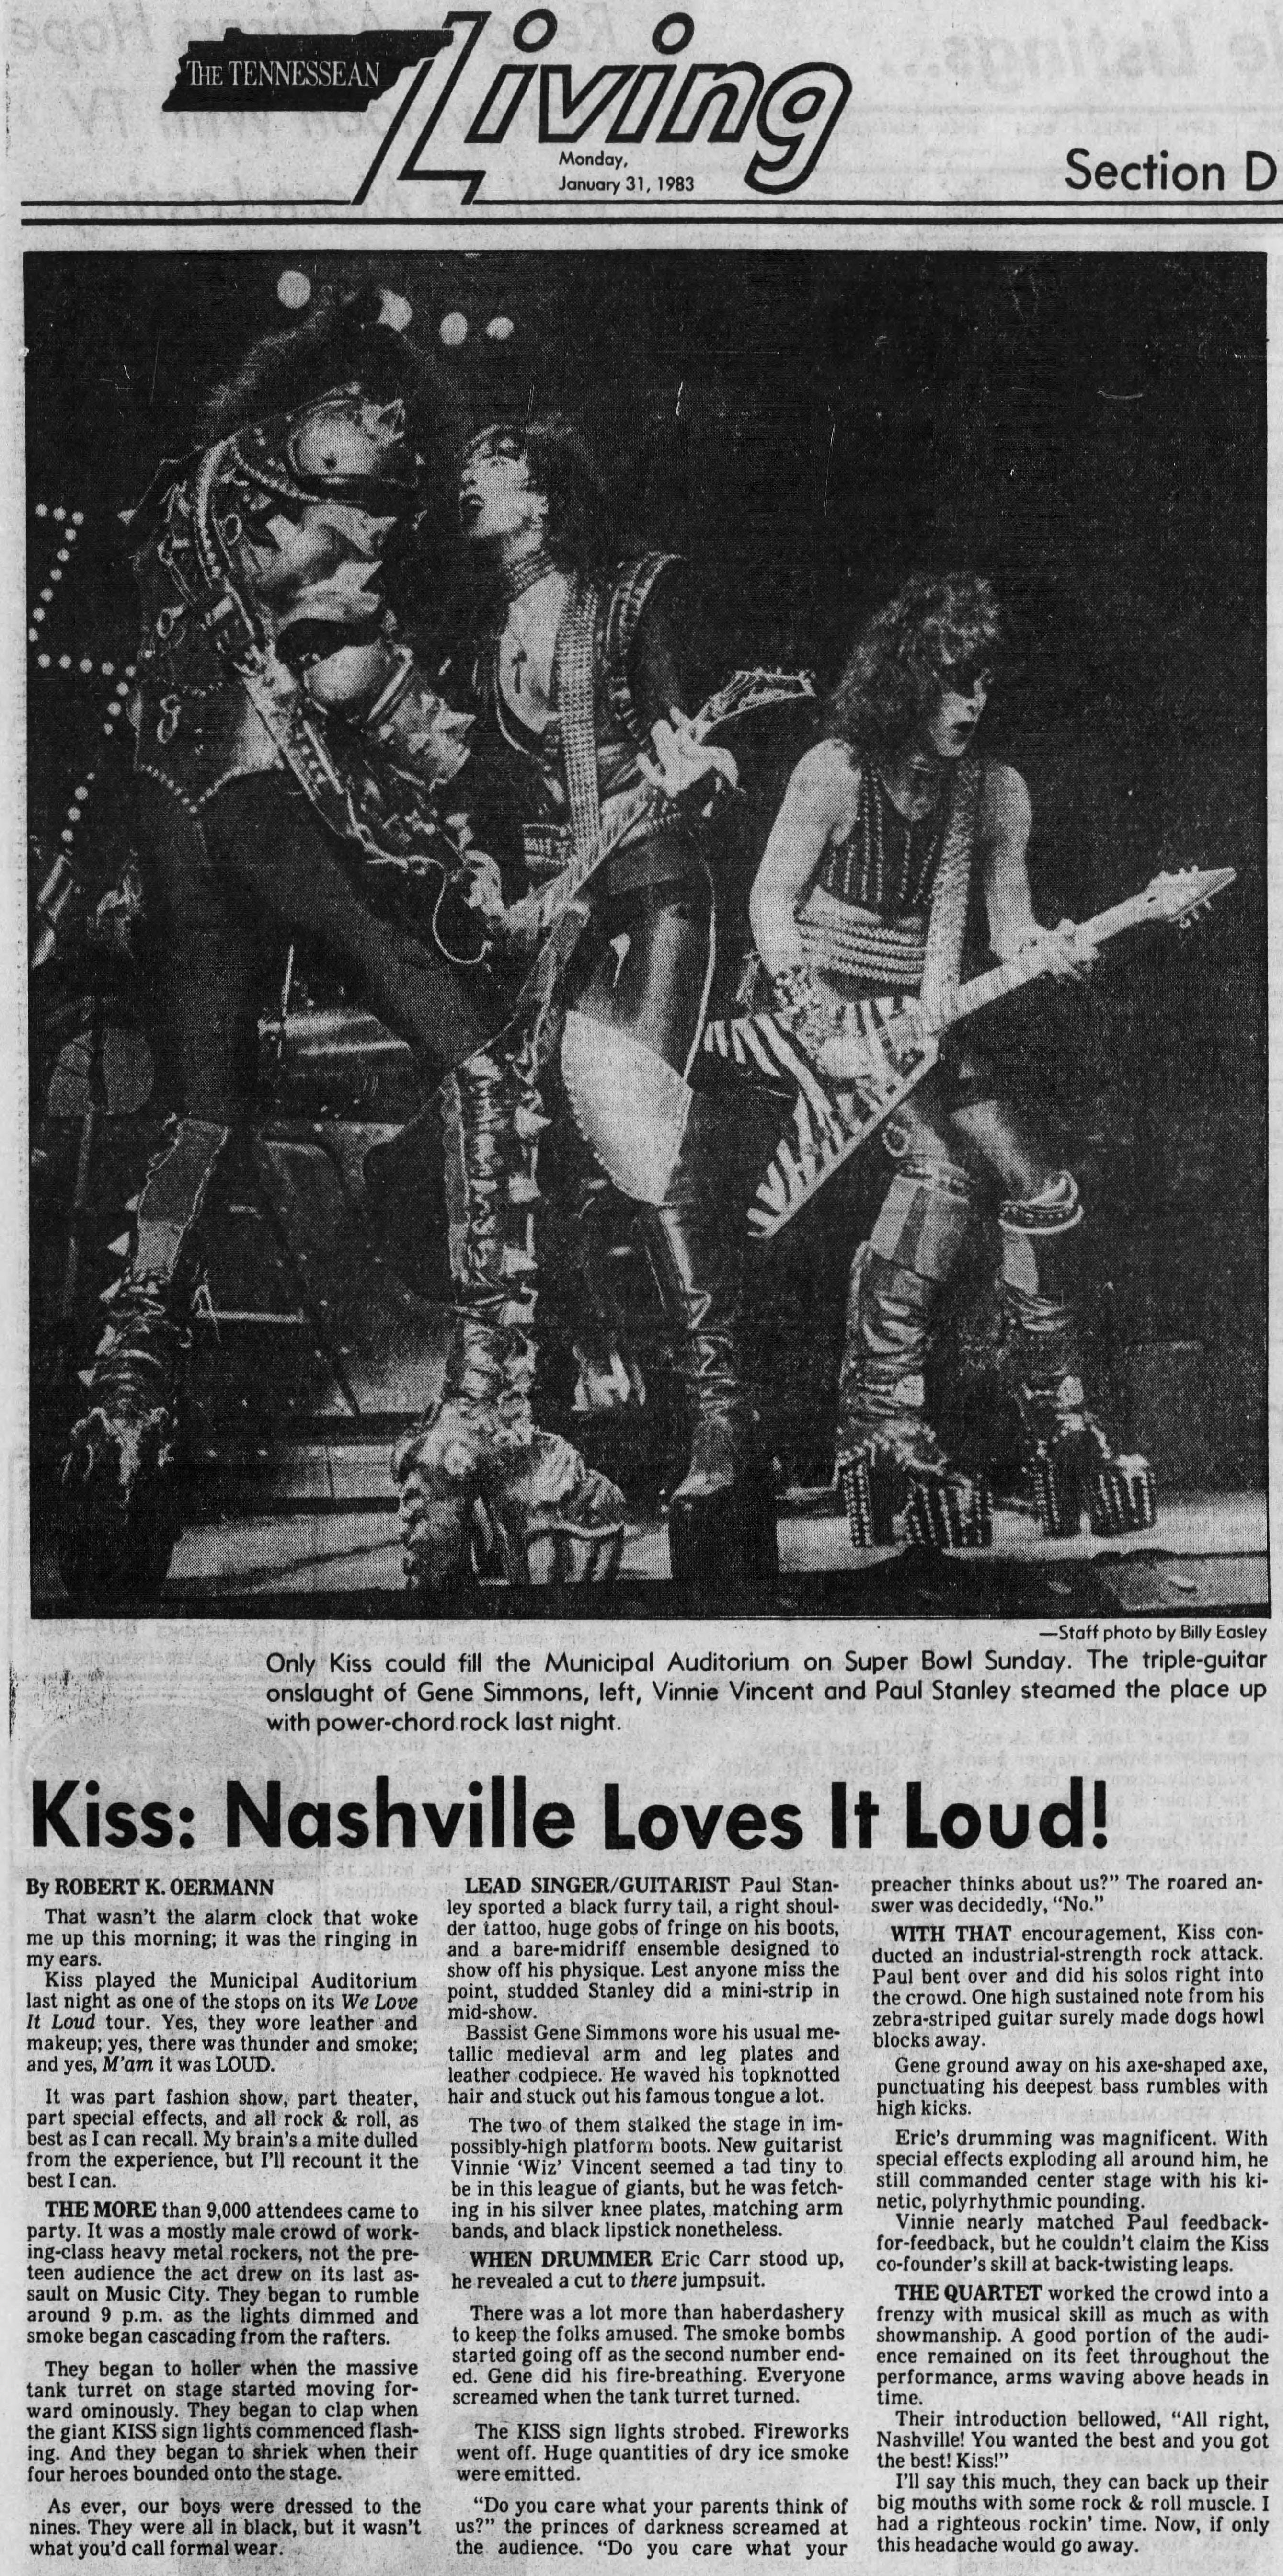 Review from Nashville, TN, USA 30 January 1983 show